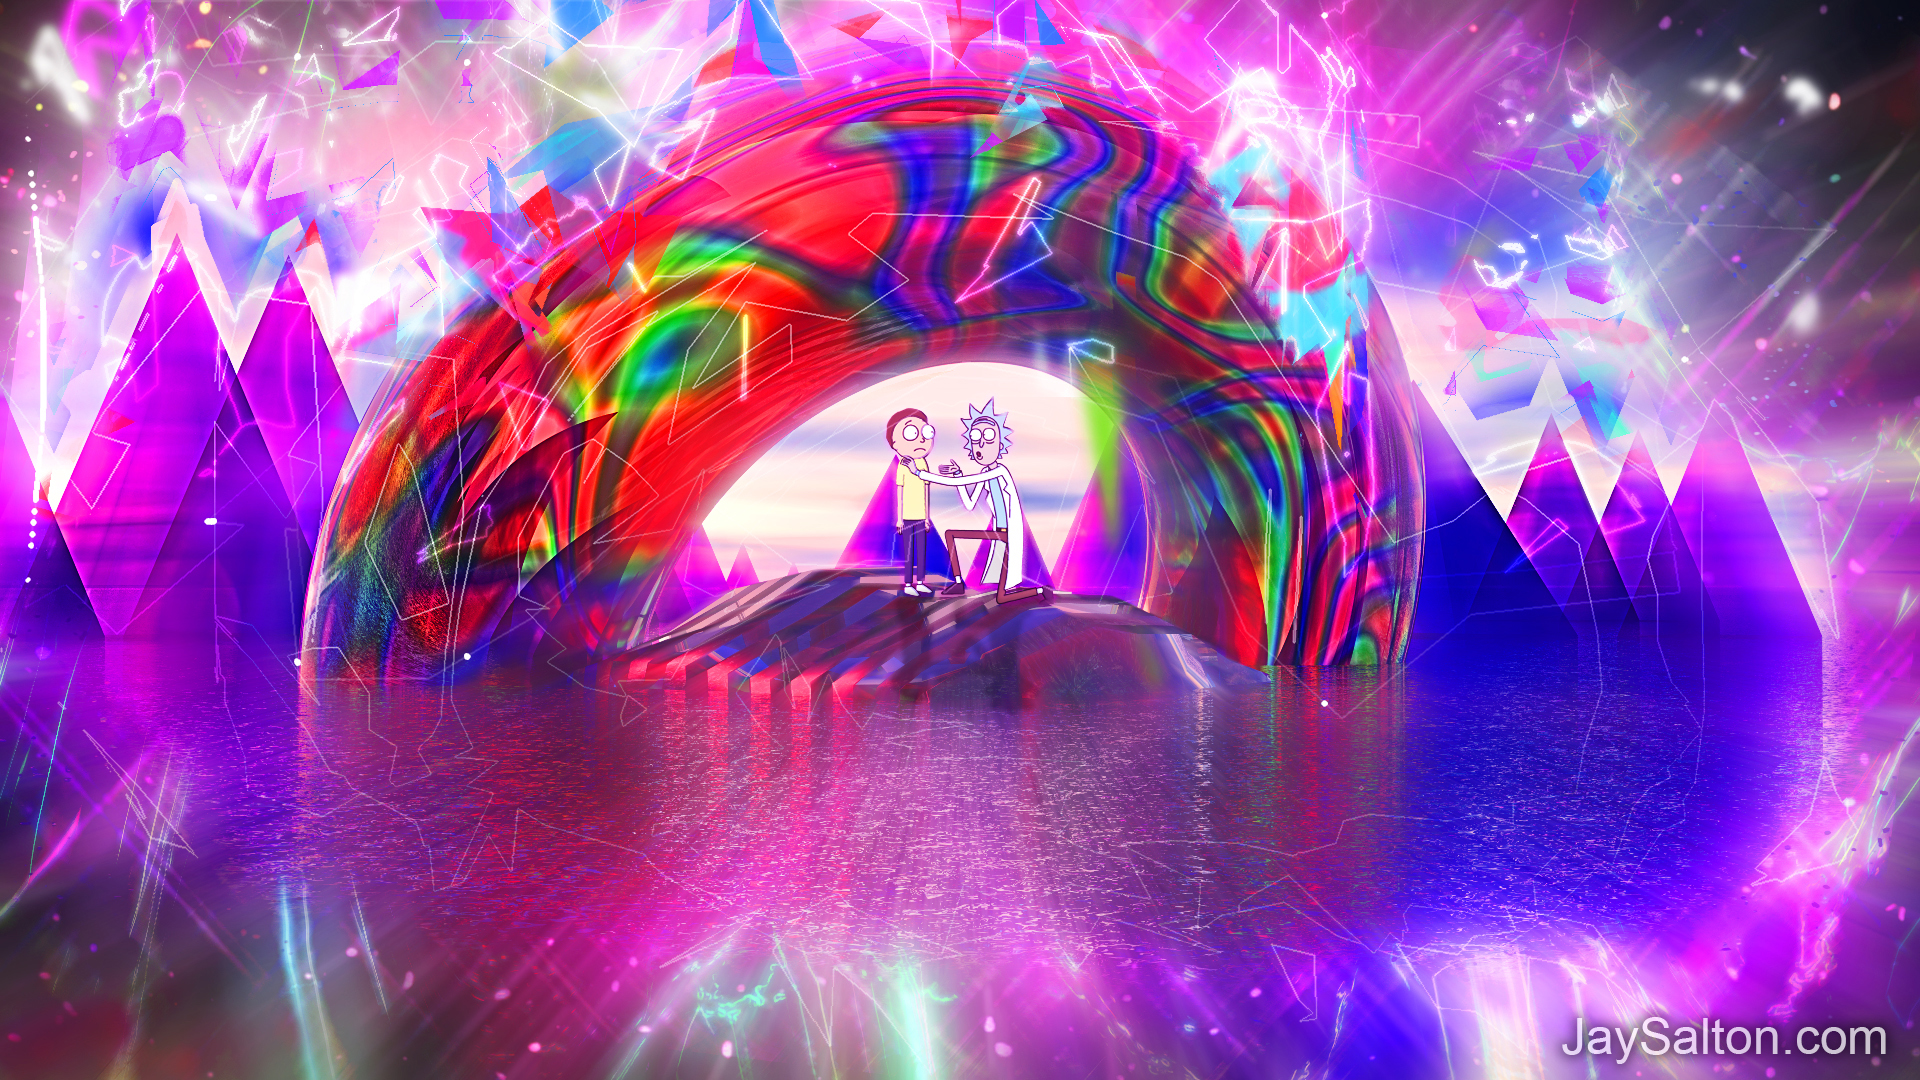 General 1920x1080 Rick and Morty Adult Swim psychedelic digital art watermarked